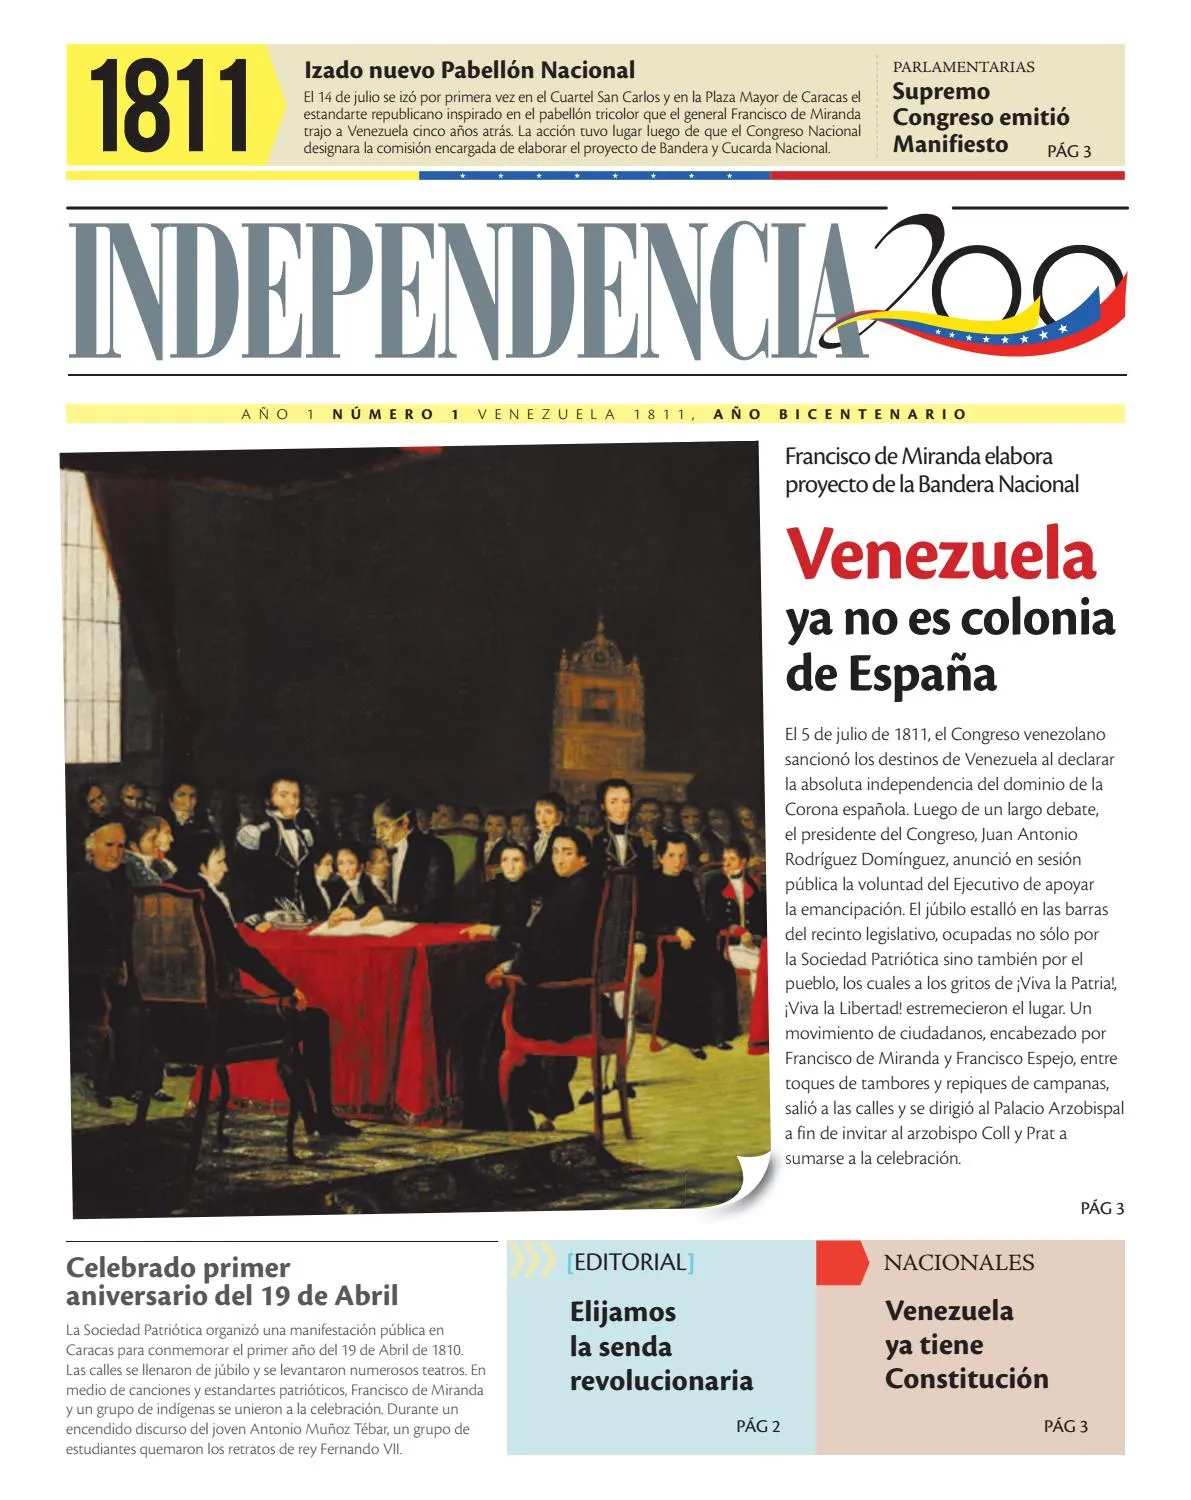 Independencia 200 V. 1 (1811-1830) by Agn Ven - Issuu